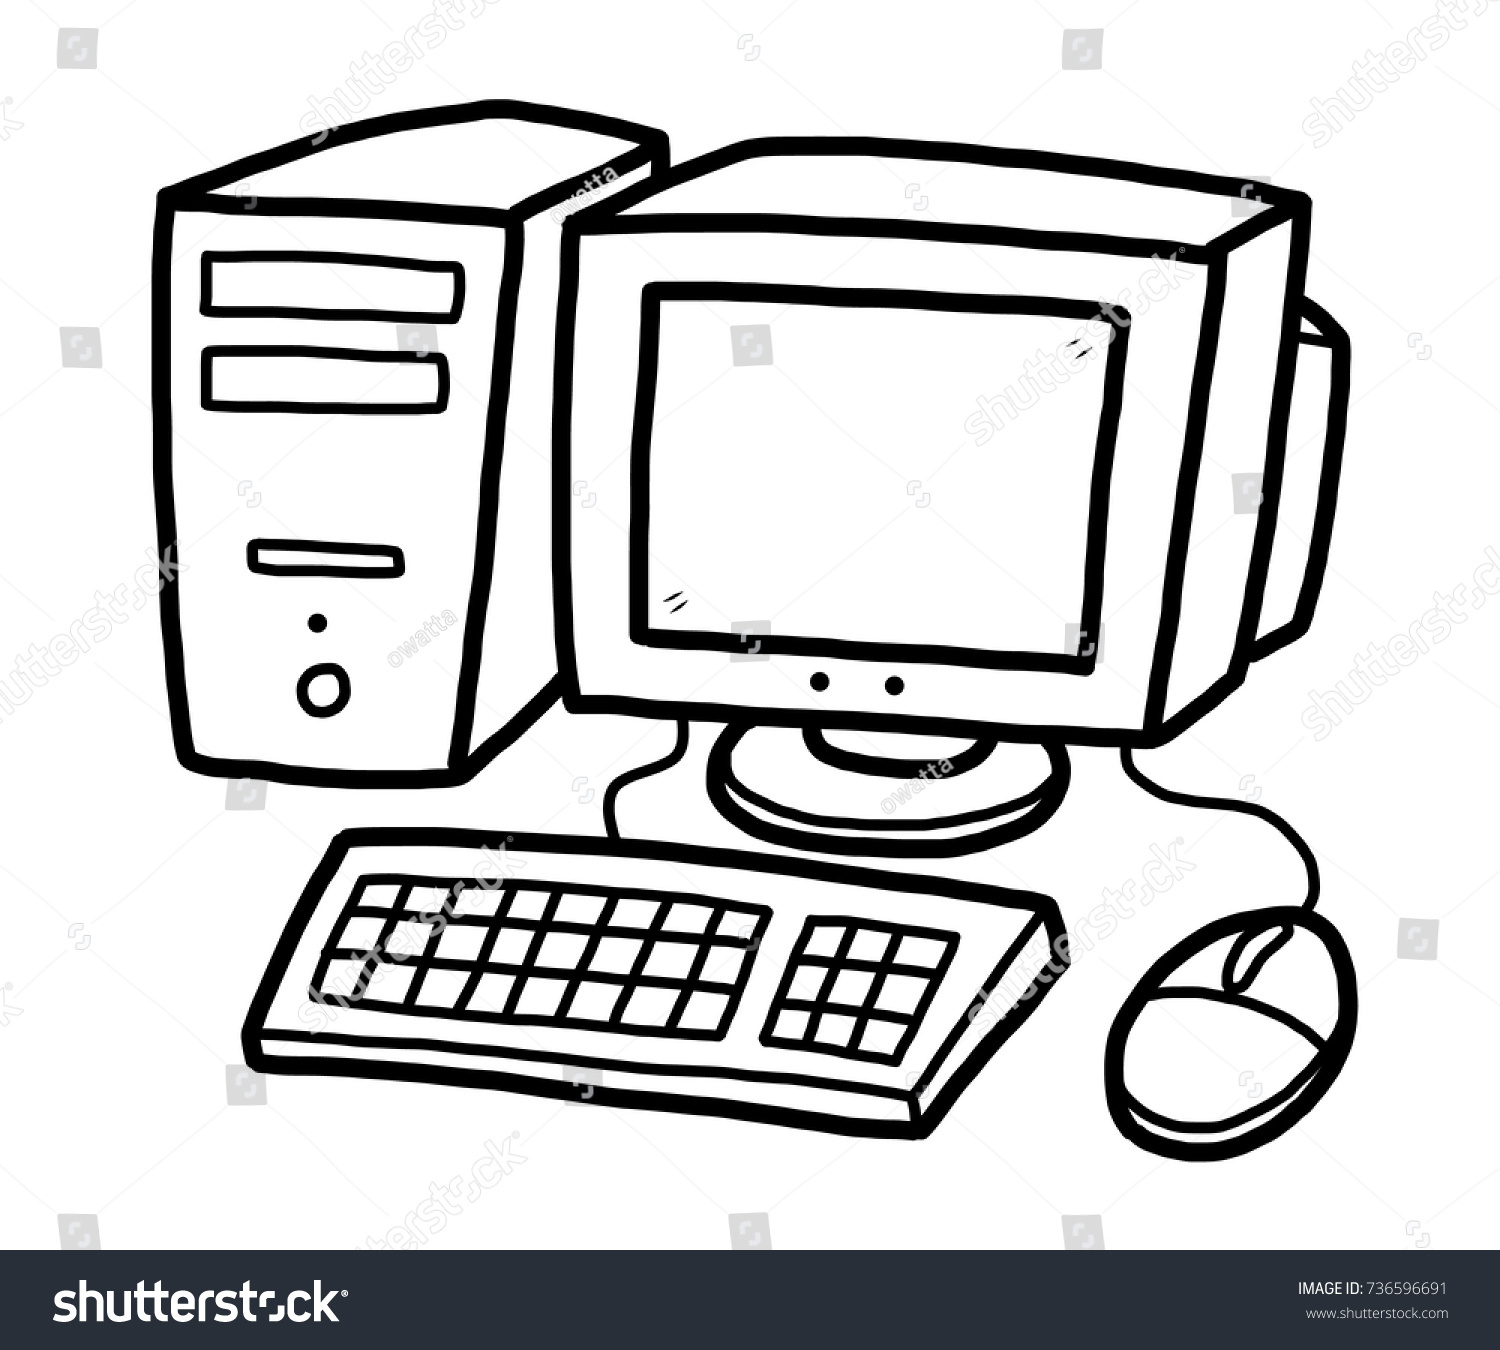 Computer Black cliparts image pack with transparent images